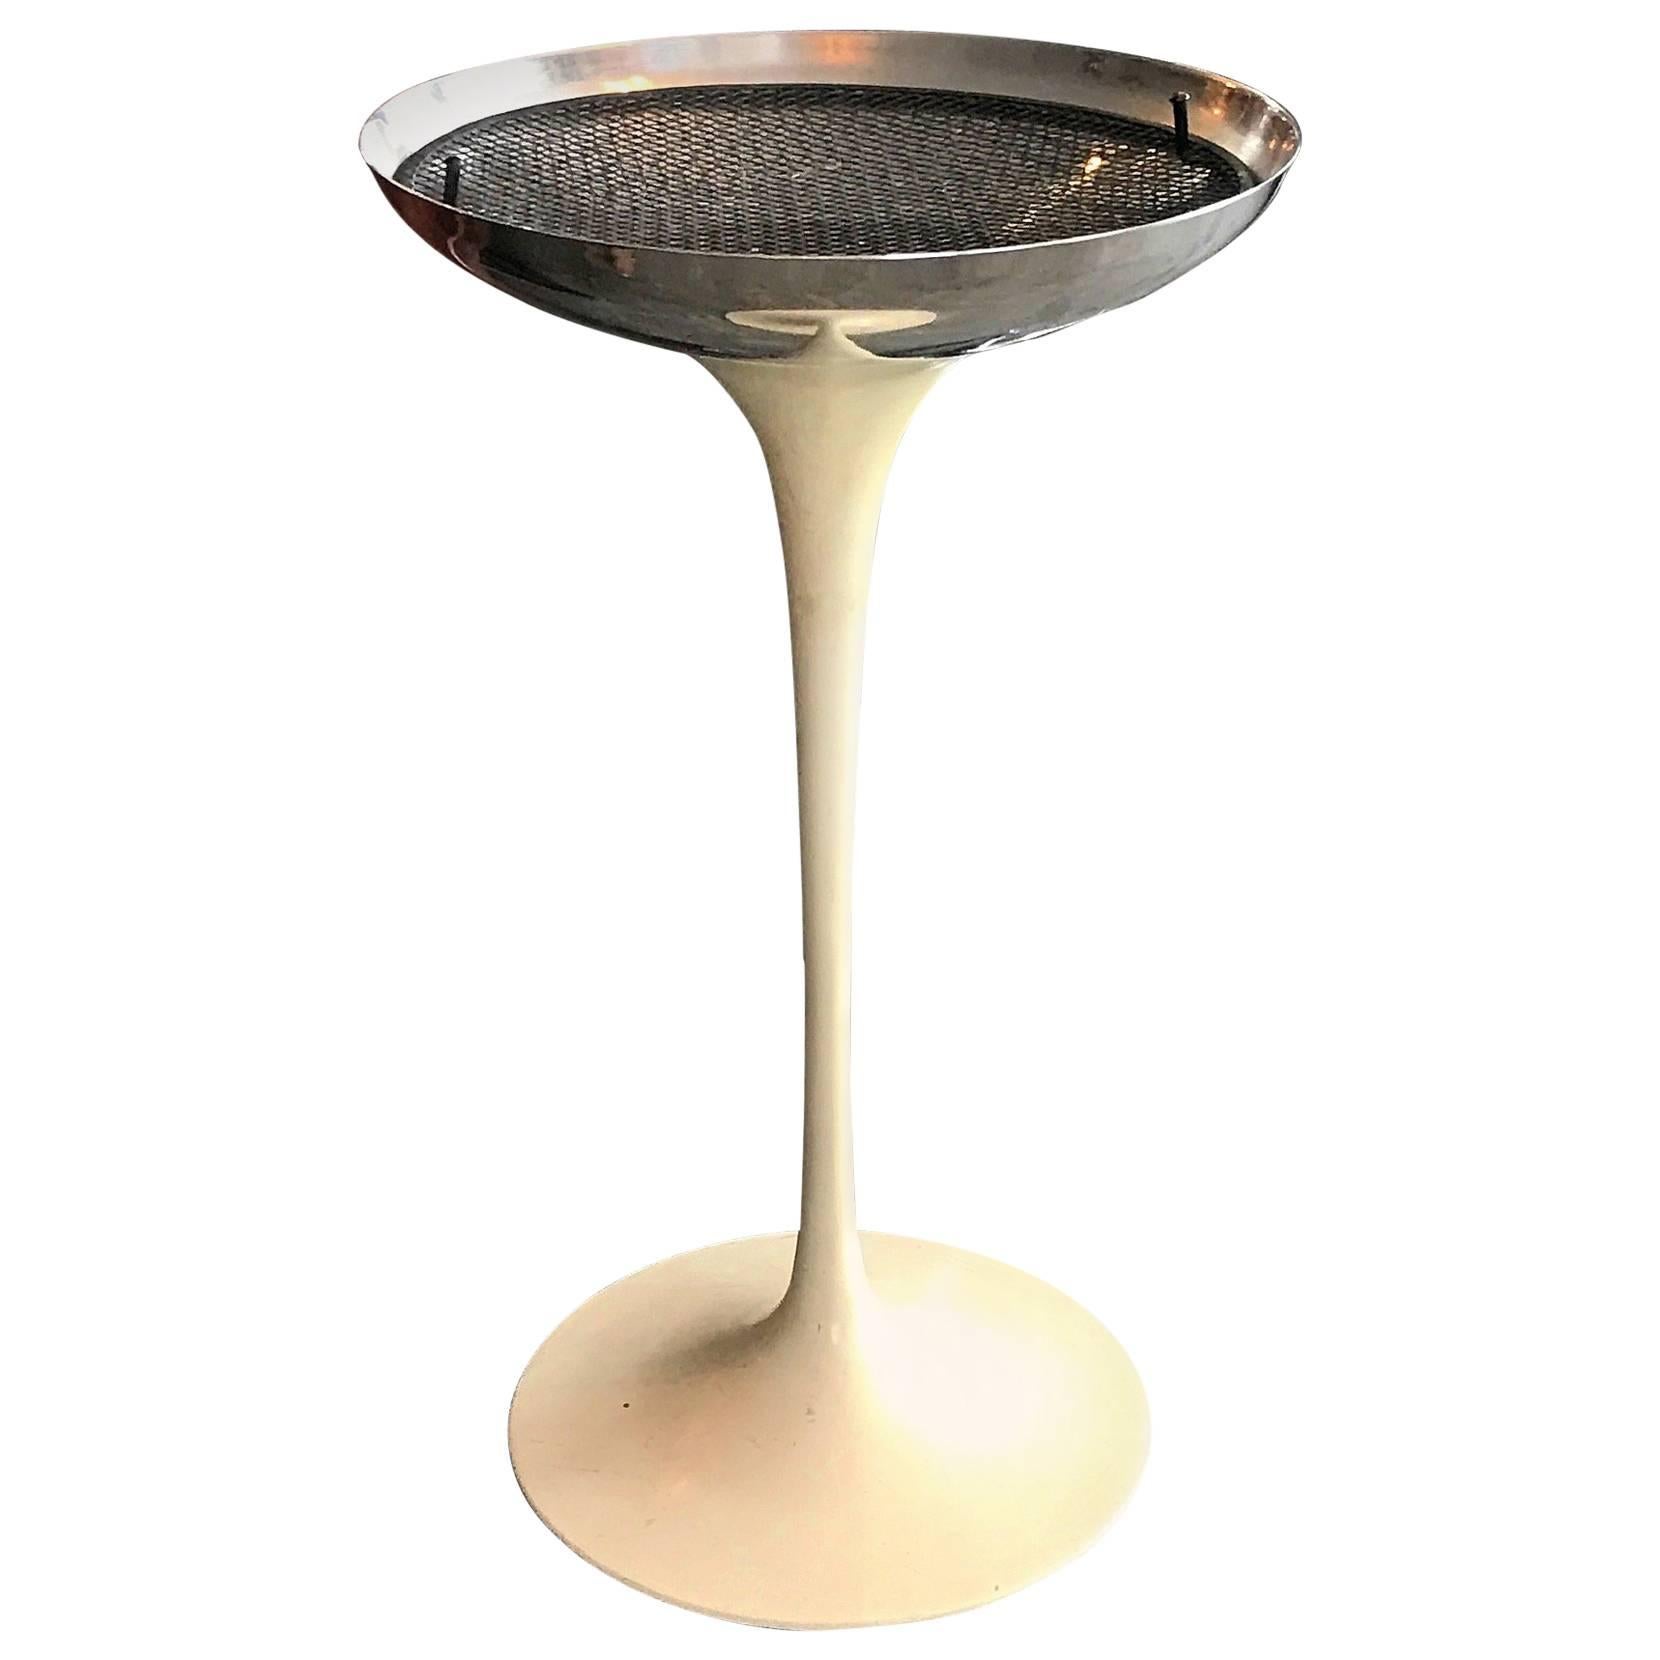 Vintage Eero Saarinen for Knoll Ashtray or Catch All